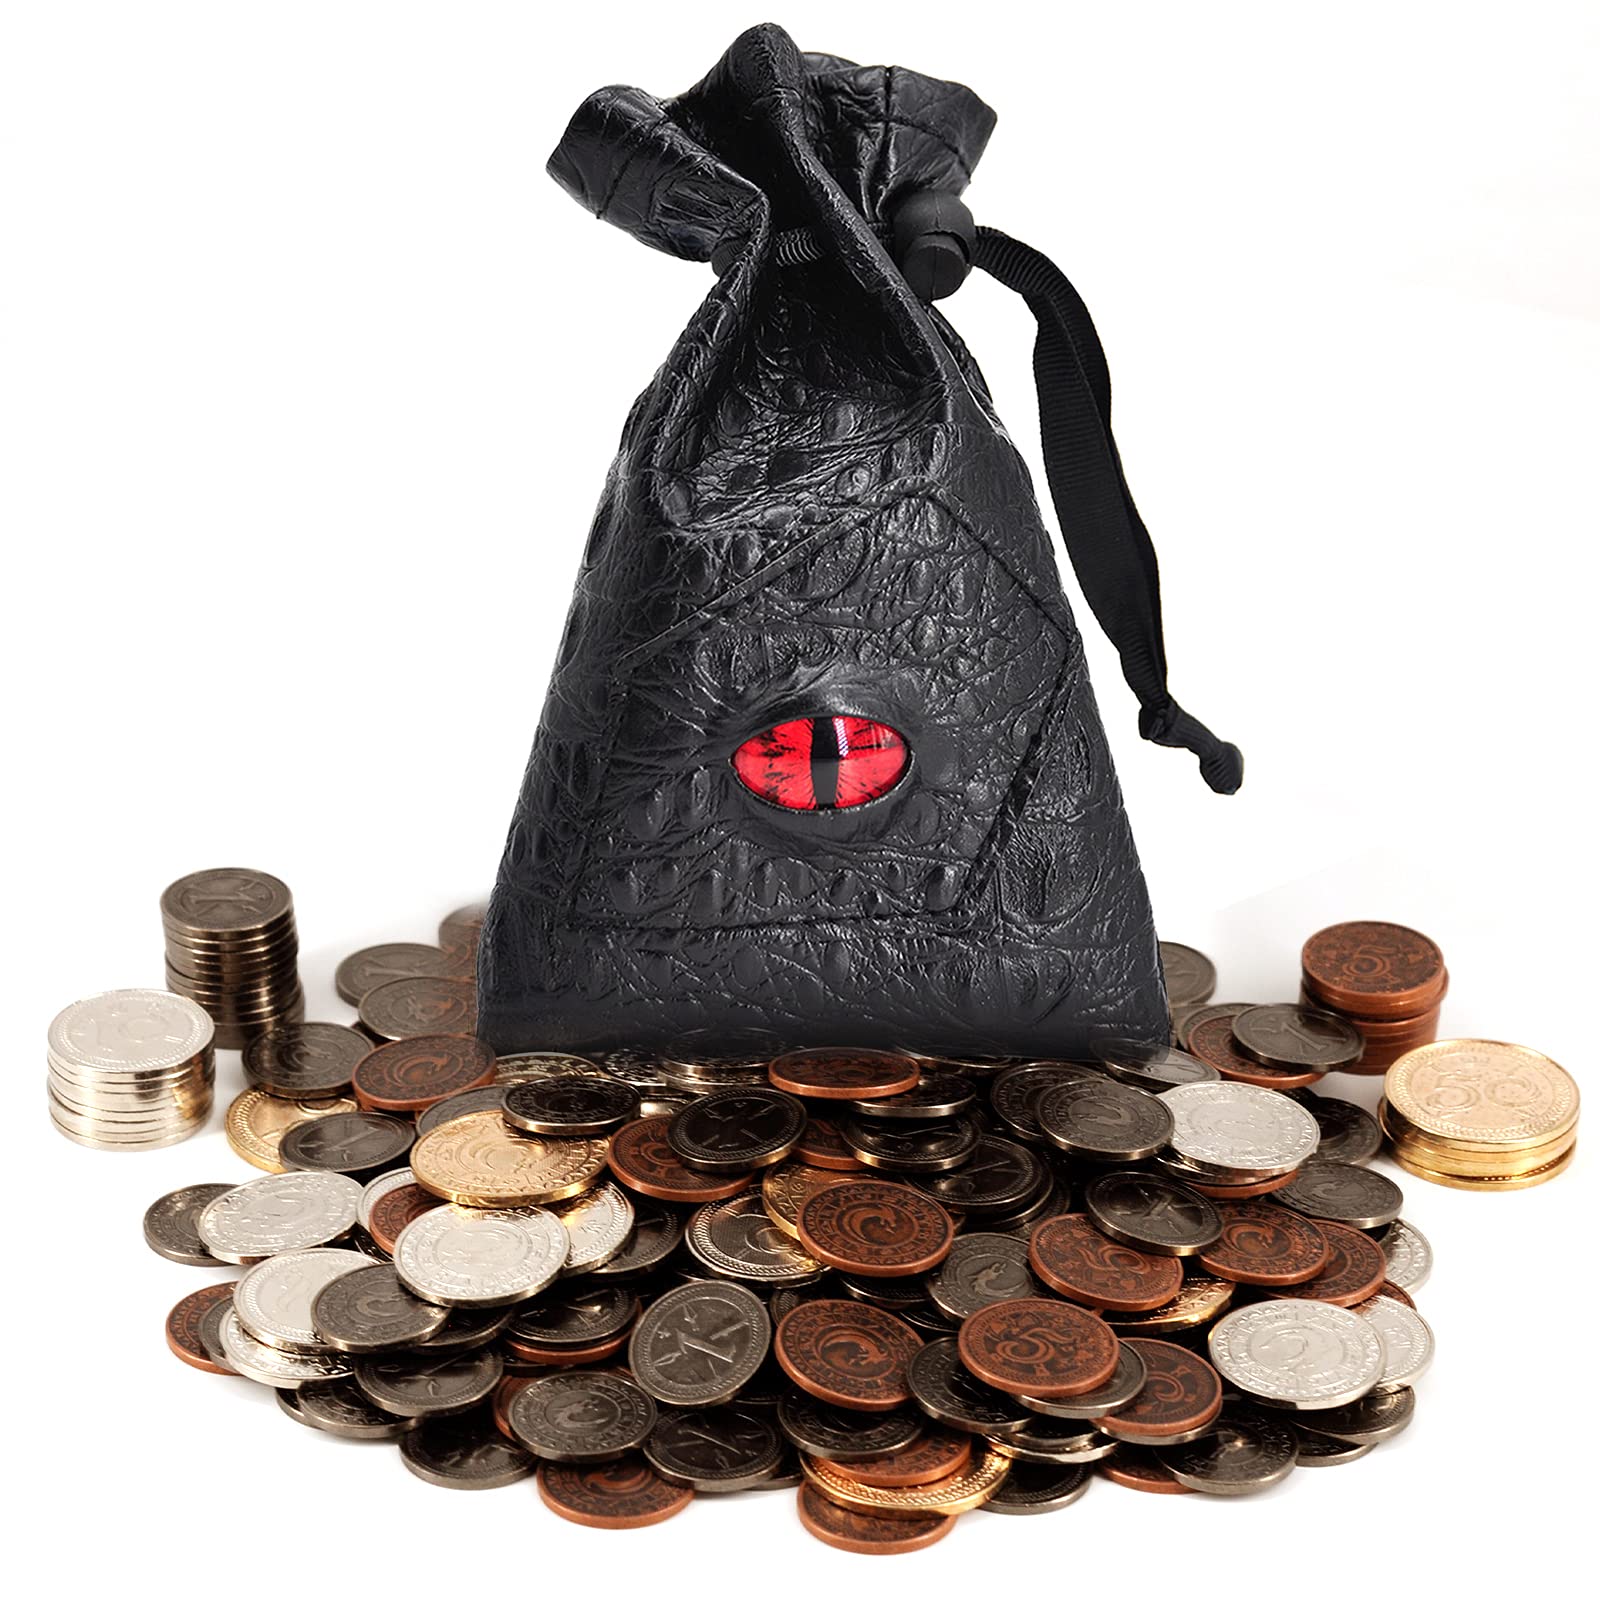 [Hale's Guide] Top 3 Ways to Track Money in D&D – The Shop of Many Things